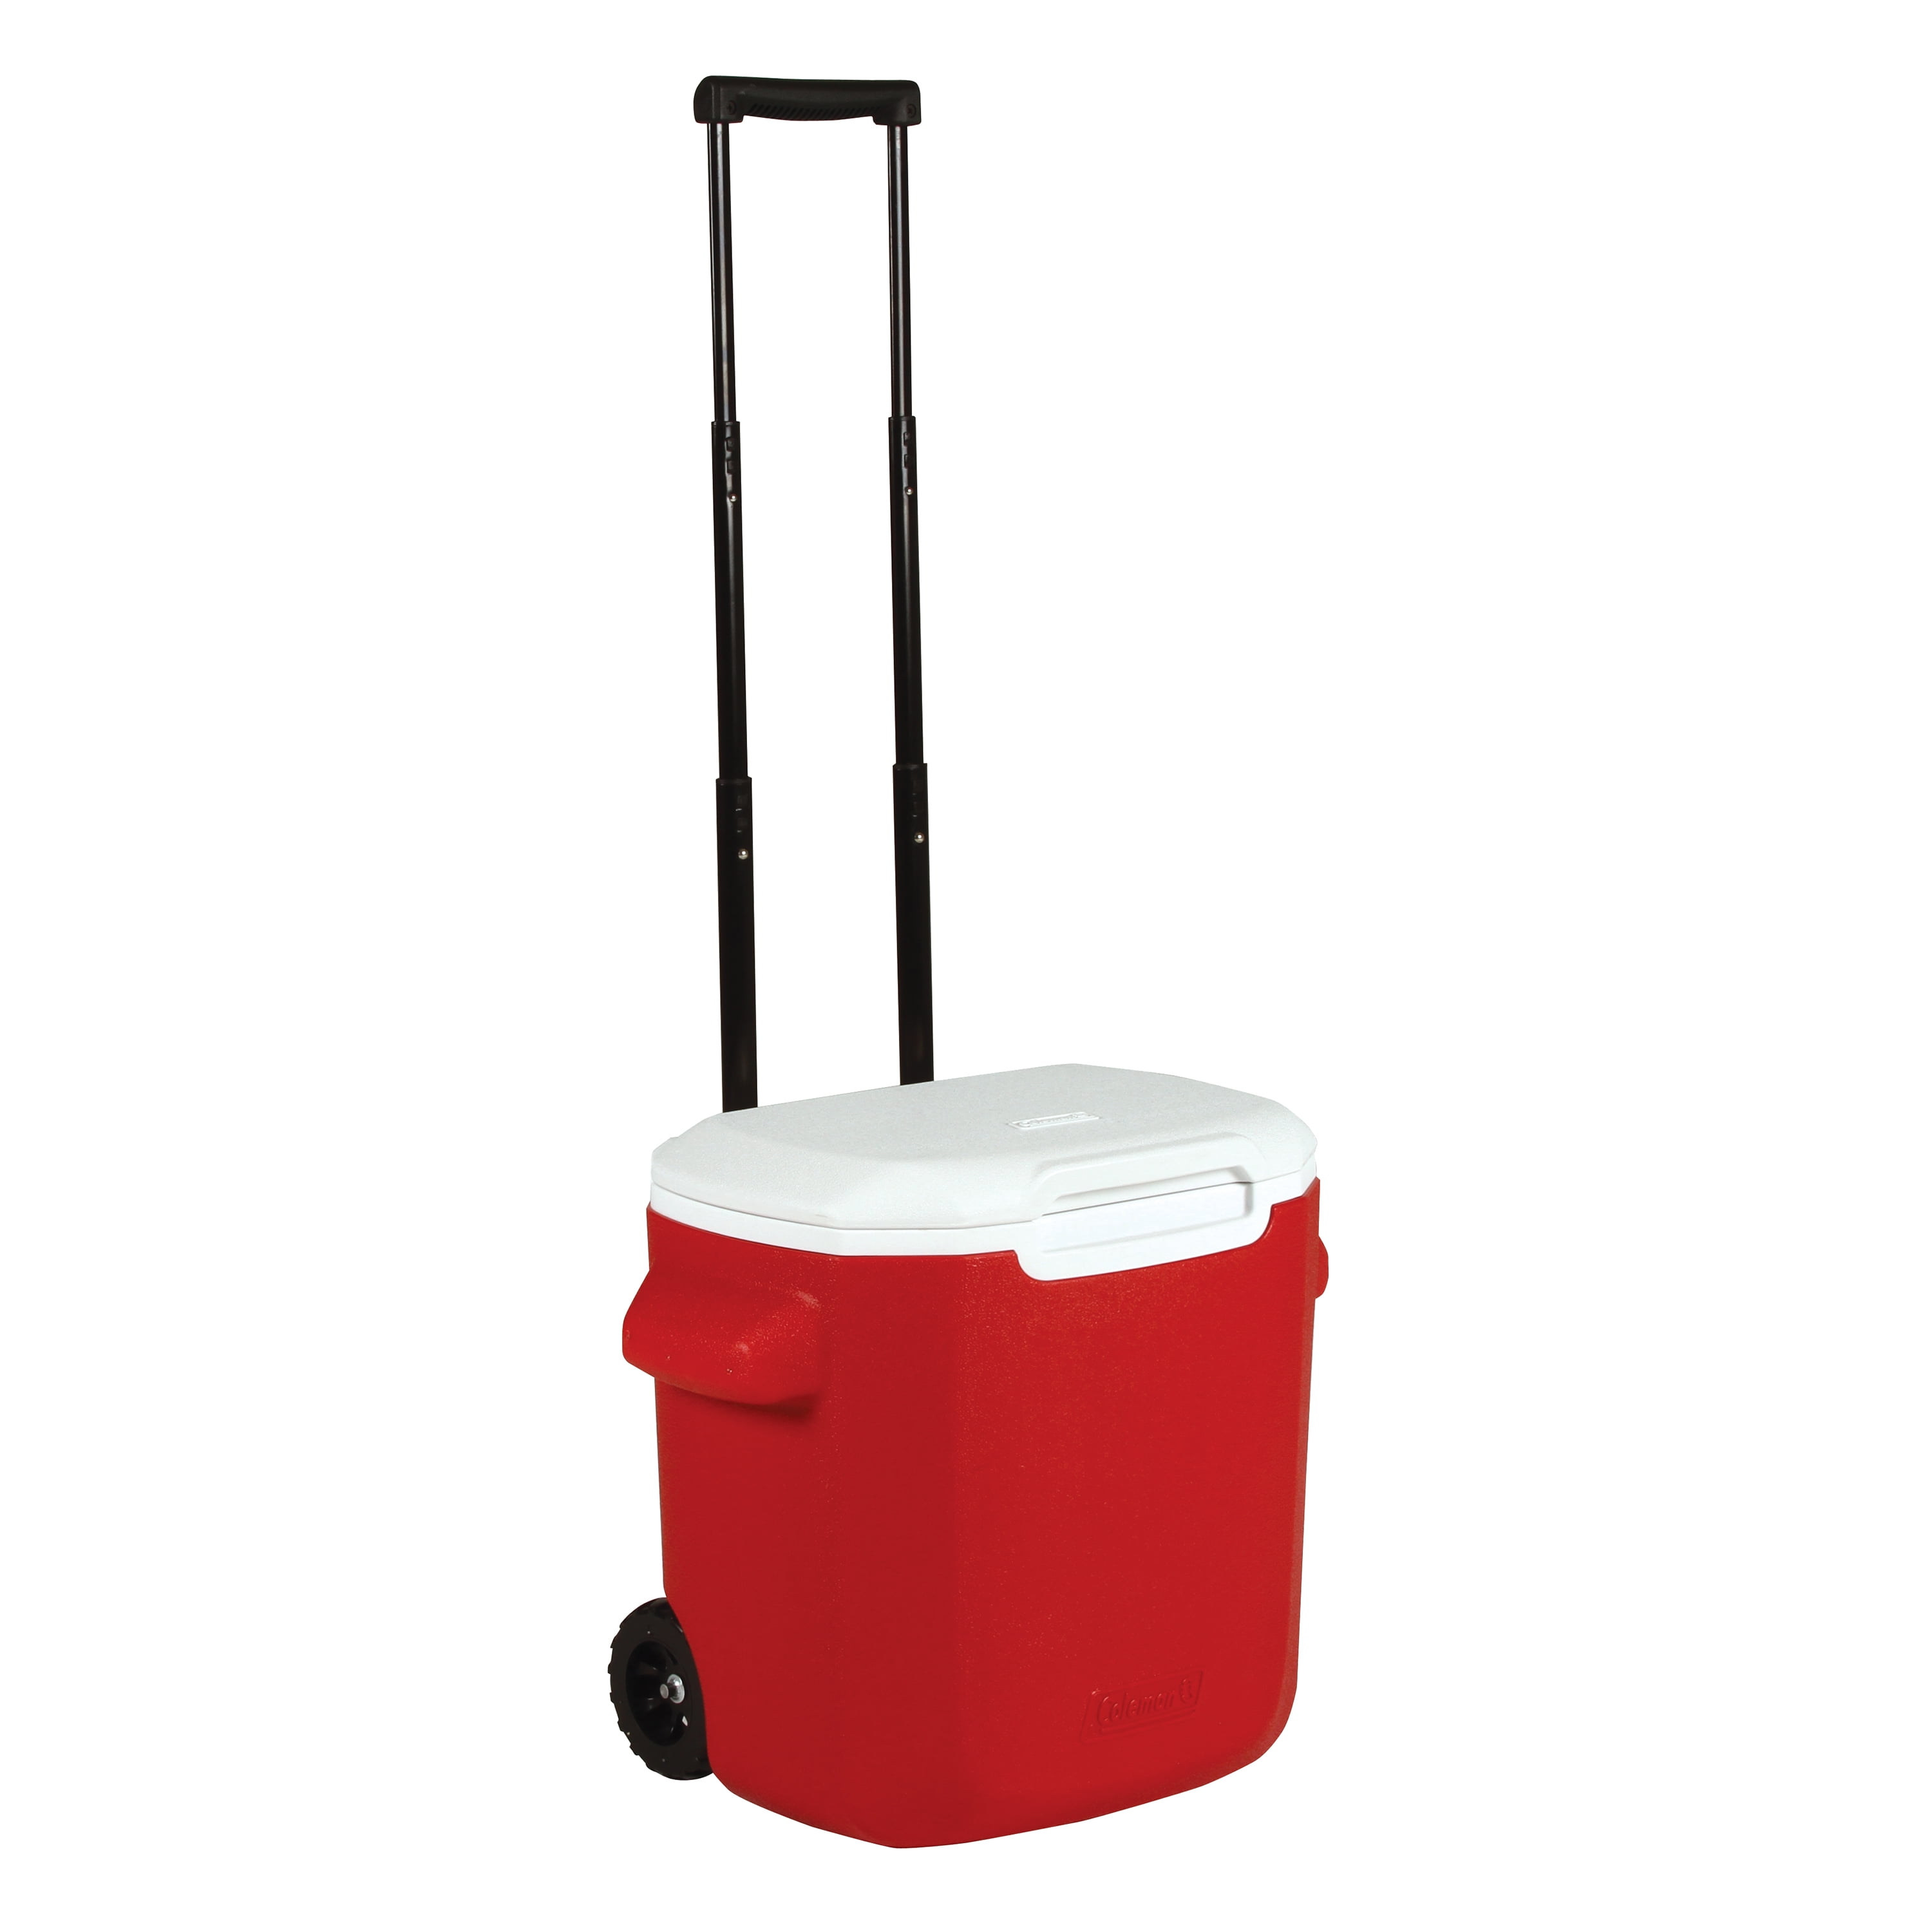 Blue NEW Coleman 16-Quart Performance Cooler with Wheels Portable Cooling Red 